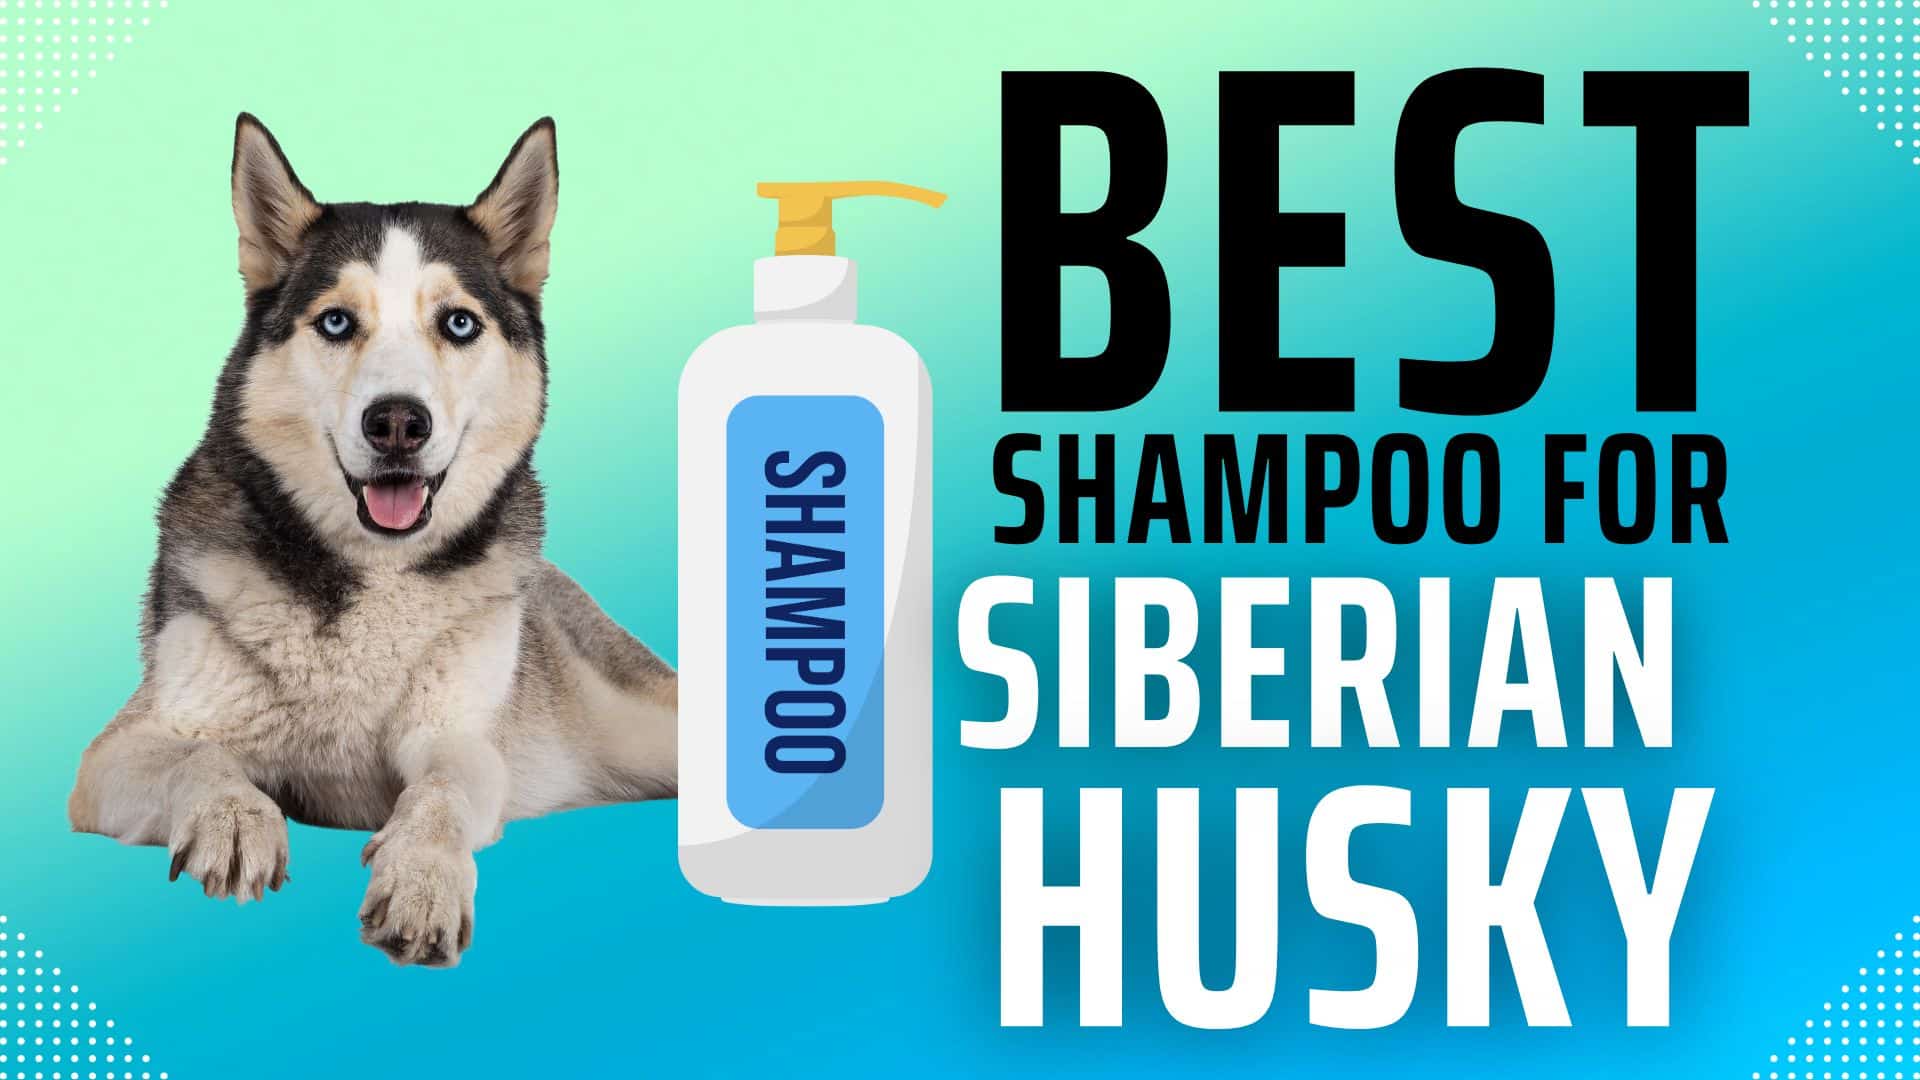 Best shampoo for huskies with wet dog smell